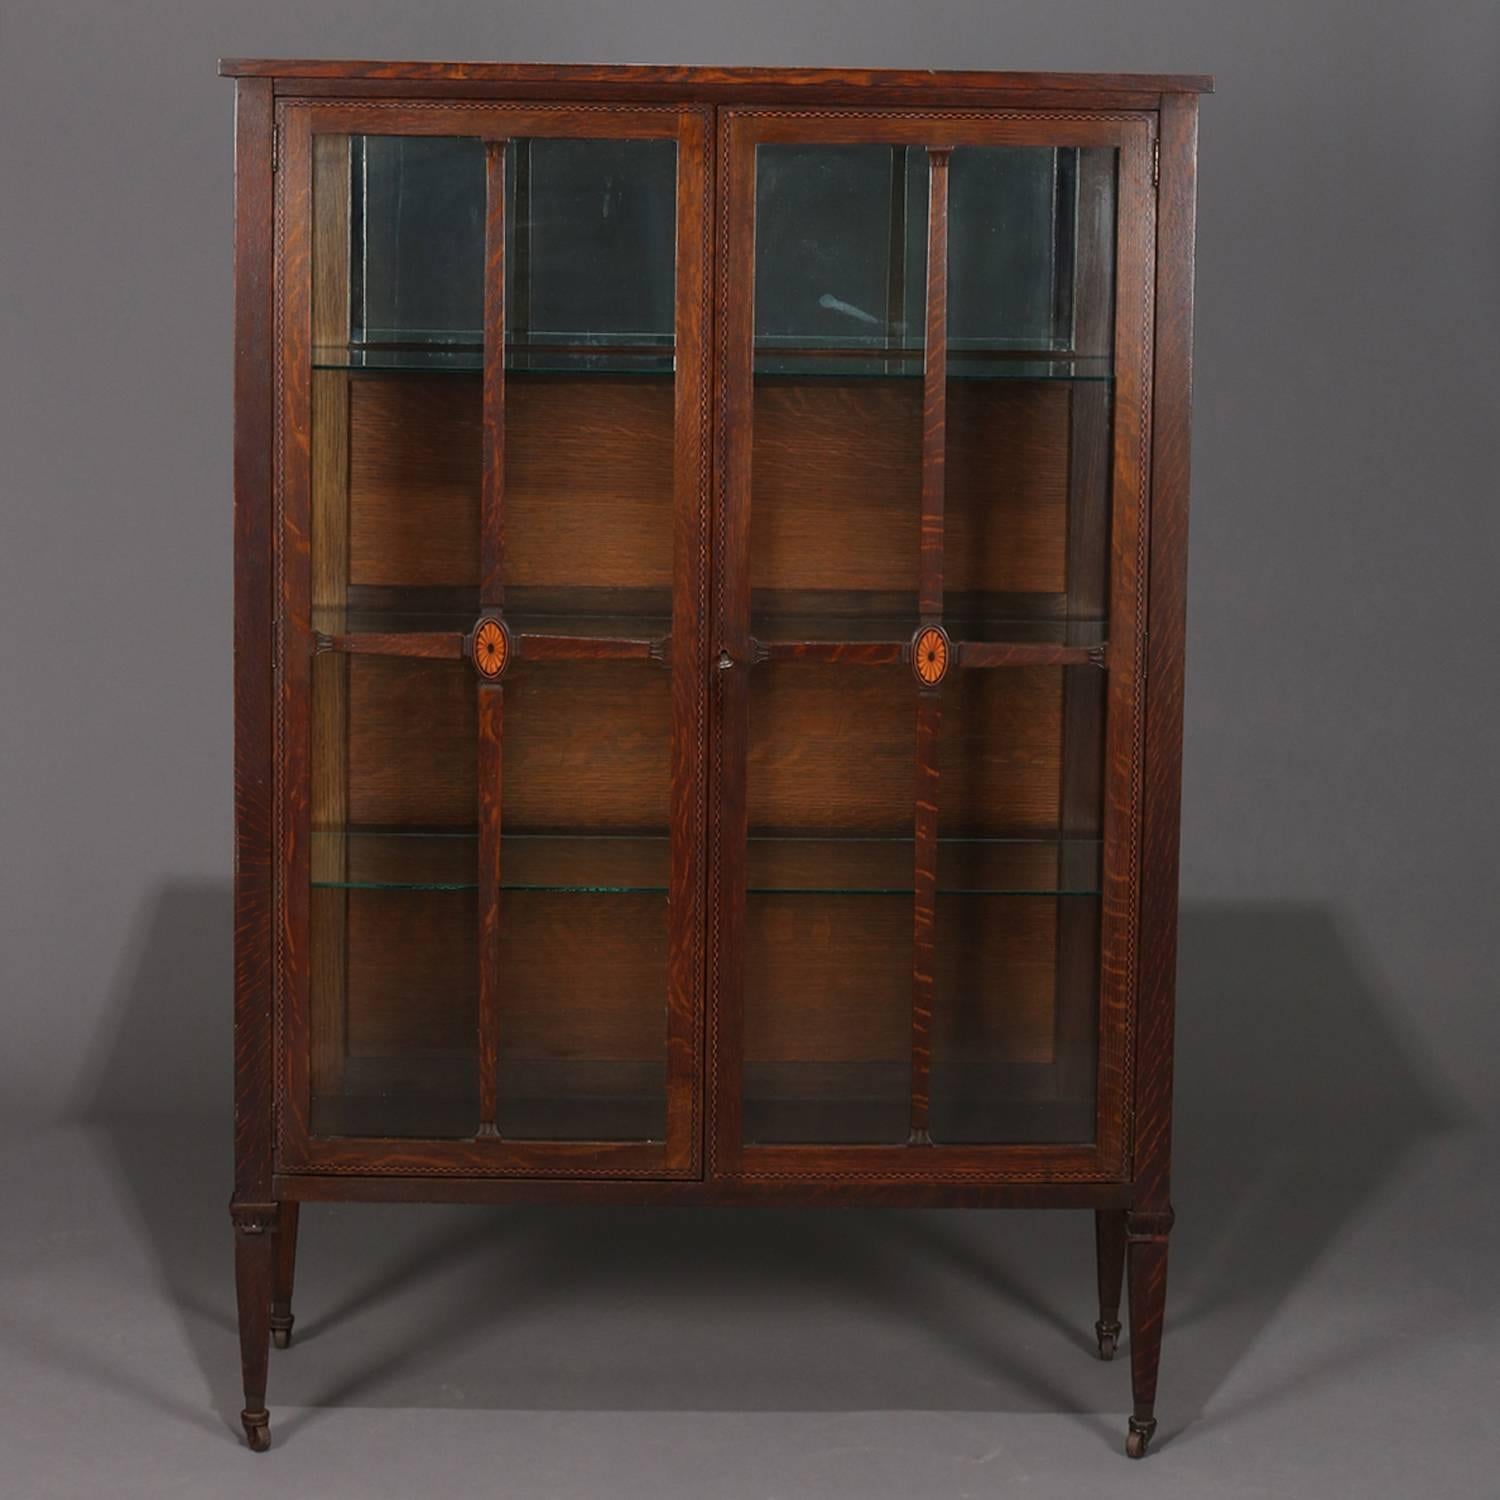 Arts & Crafts mission oak two-door china cabinet by Lifetime Furniture Co. of Grand Rapids, MI features oak construction with ebonized and satinwood banding and patera medallions, two glass doors with lock open to a mirrored and fixed shelf